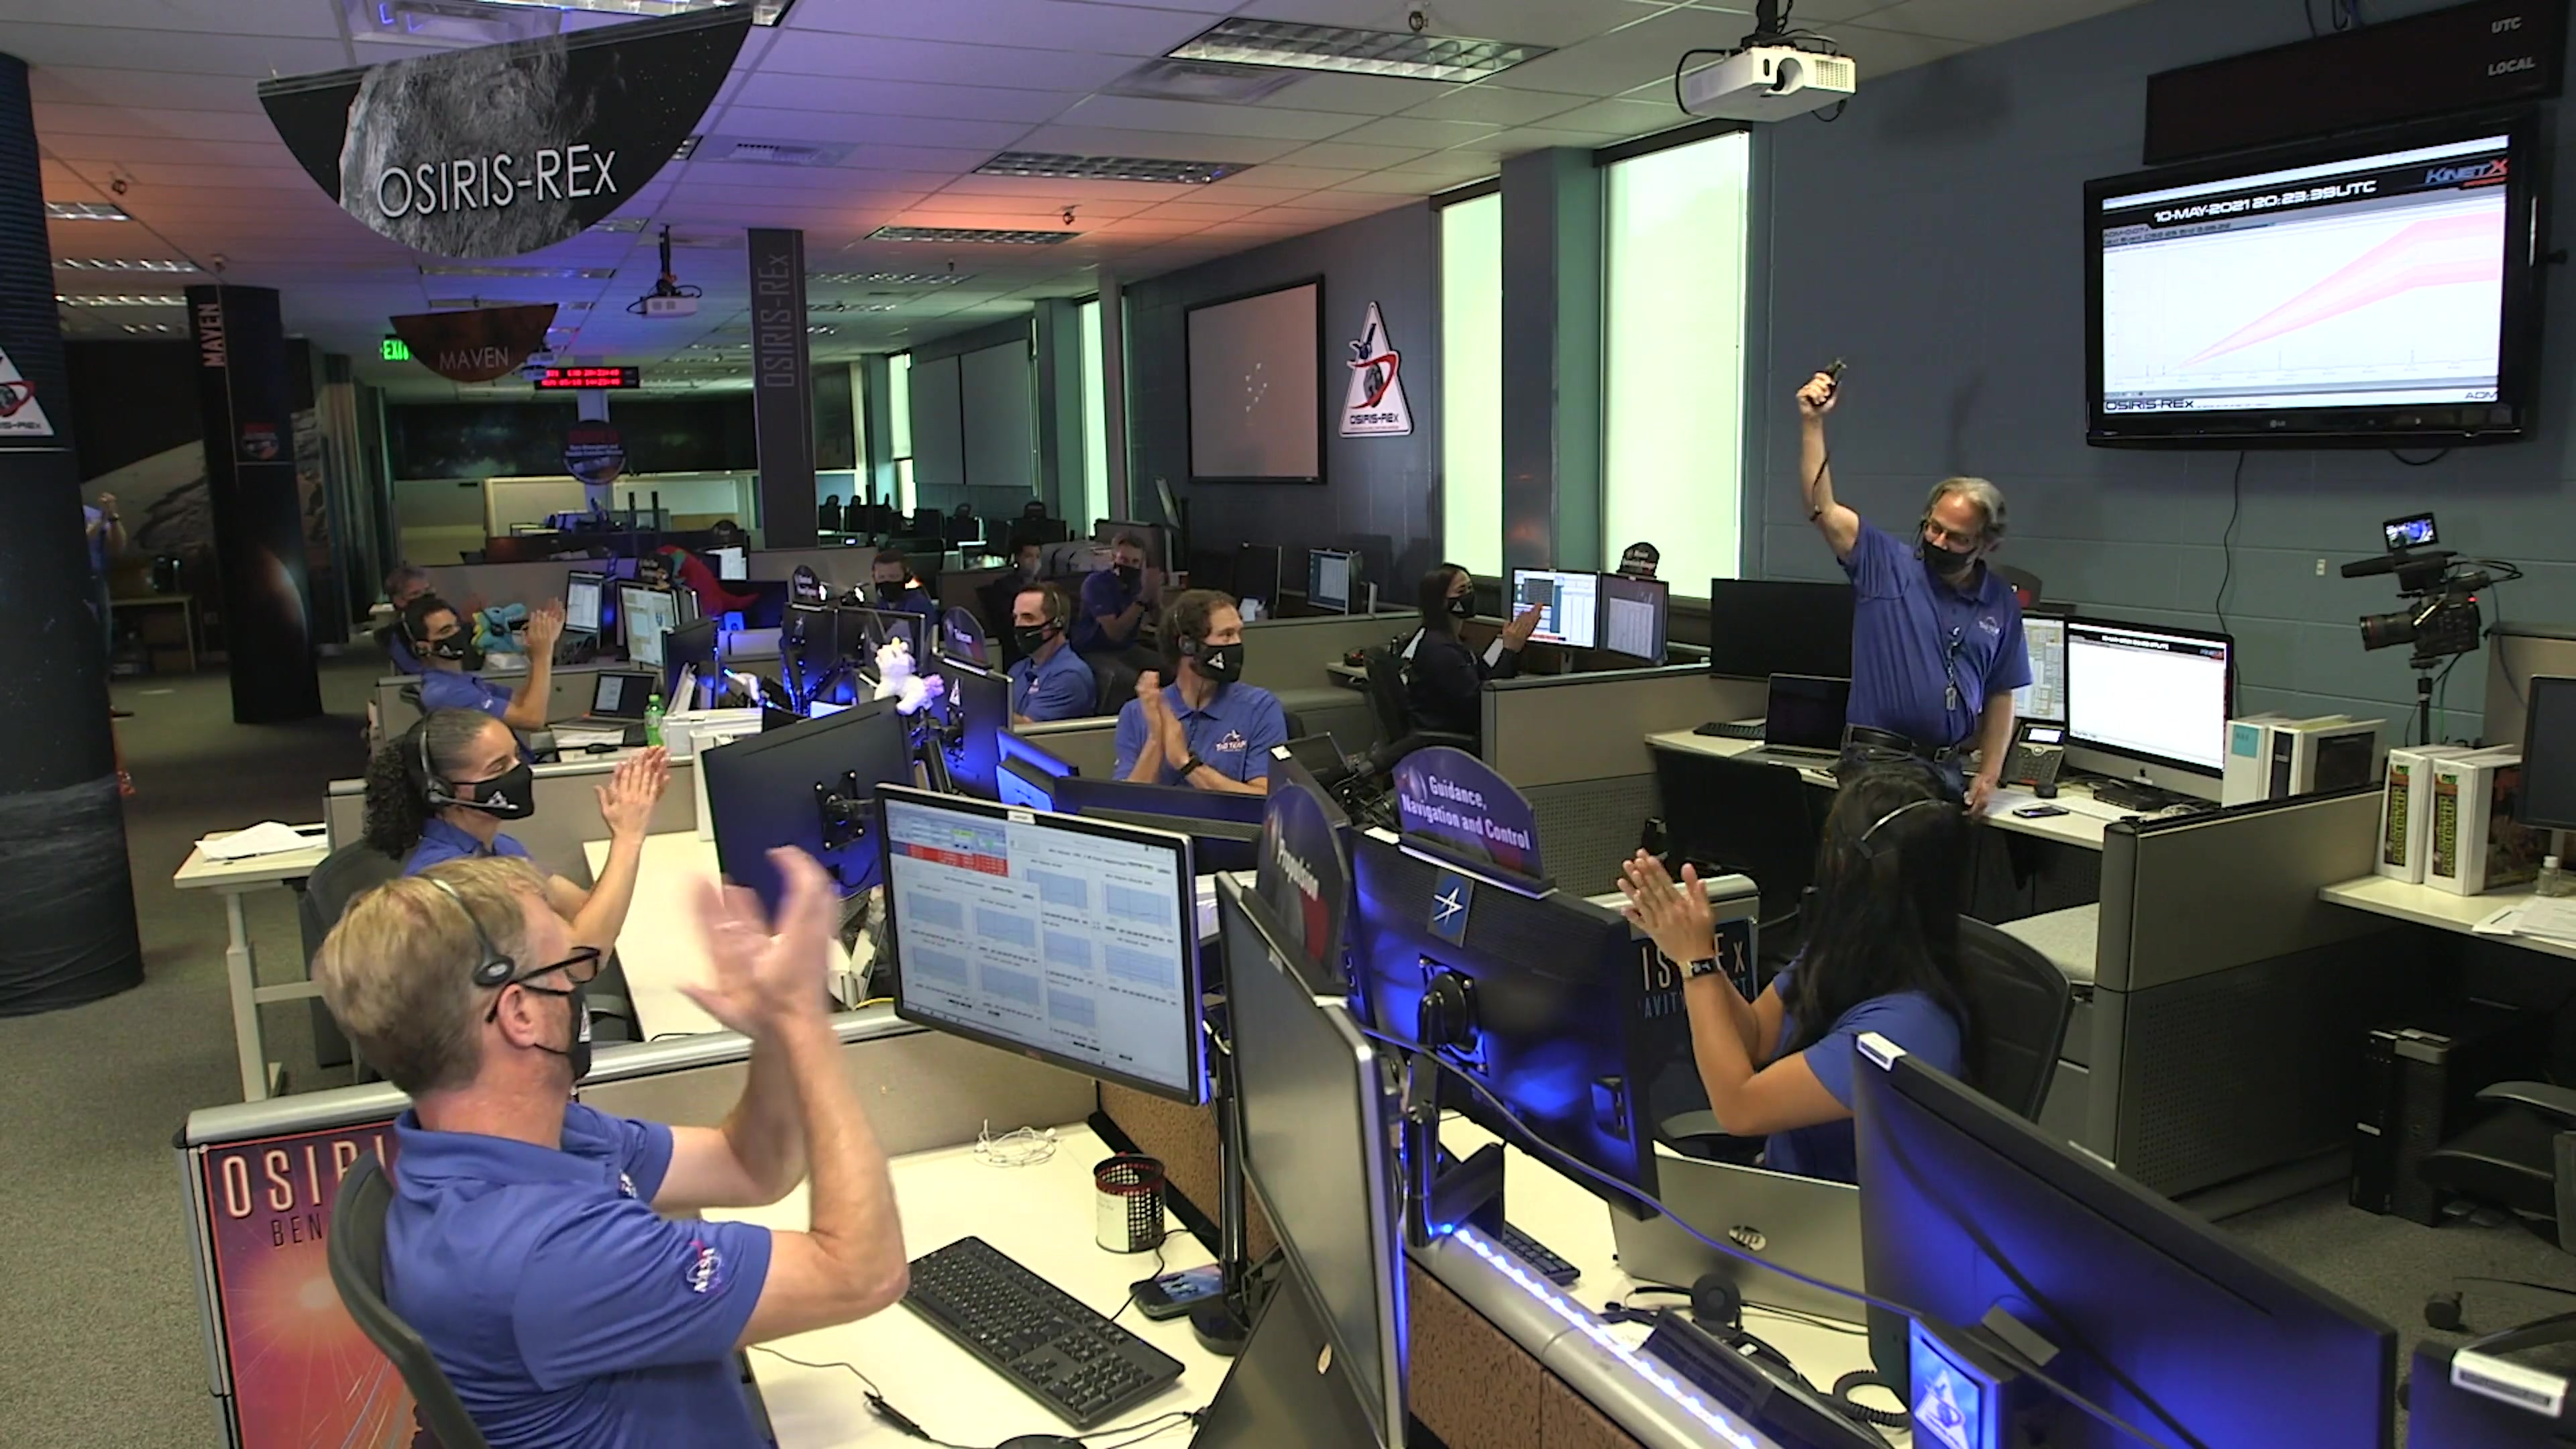 Mission team members celebrate OSIRIS-REx's successful main engine burn that sets the spacecraft on its 2.5-year journey to Earth with samples from asteroid Bennu.Music is "Arise" by Jose Tomas Novoa Espinosa and Sebastian Felipe Olivares de Simone of Universal Production Music.